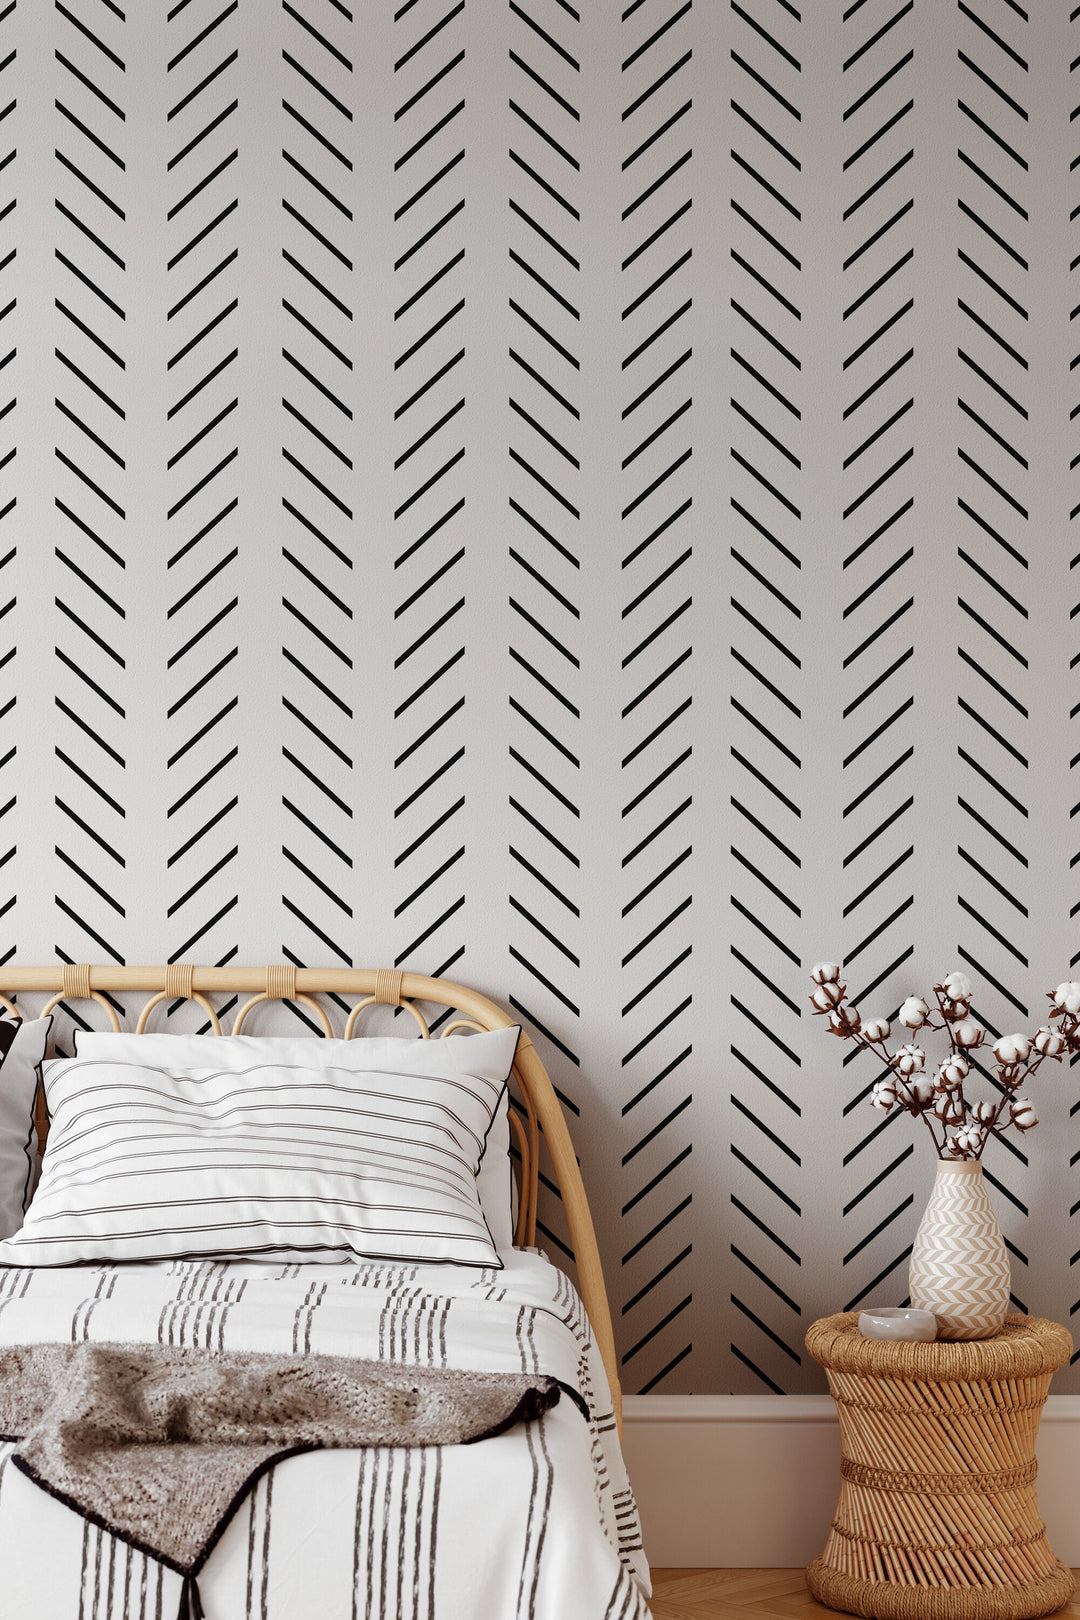 Chevron black and white NEW - Removable Self Adhesive and Traditional wallpaper #3638